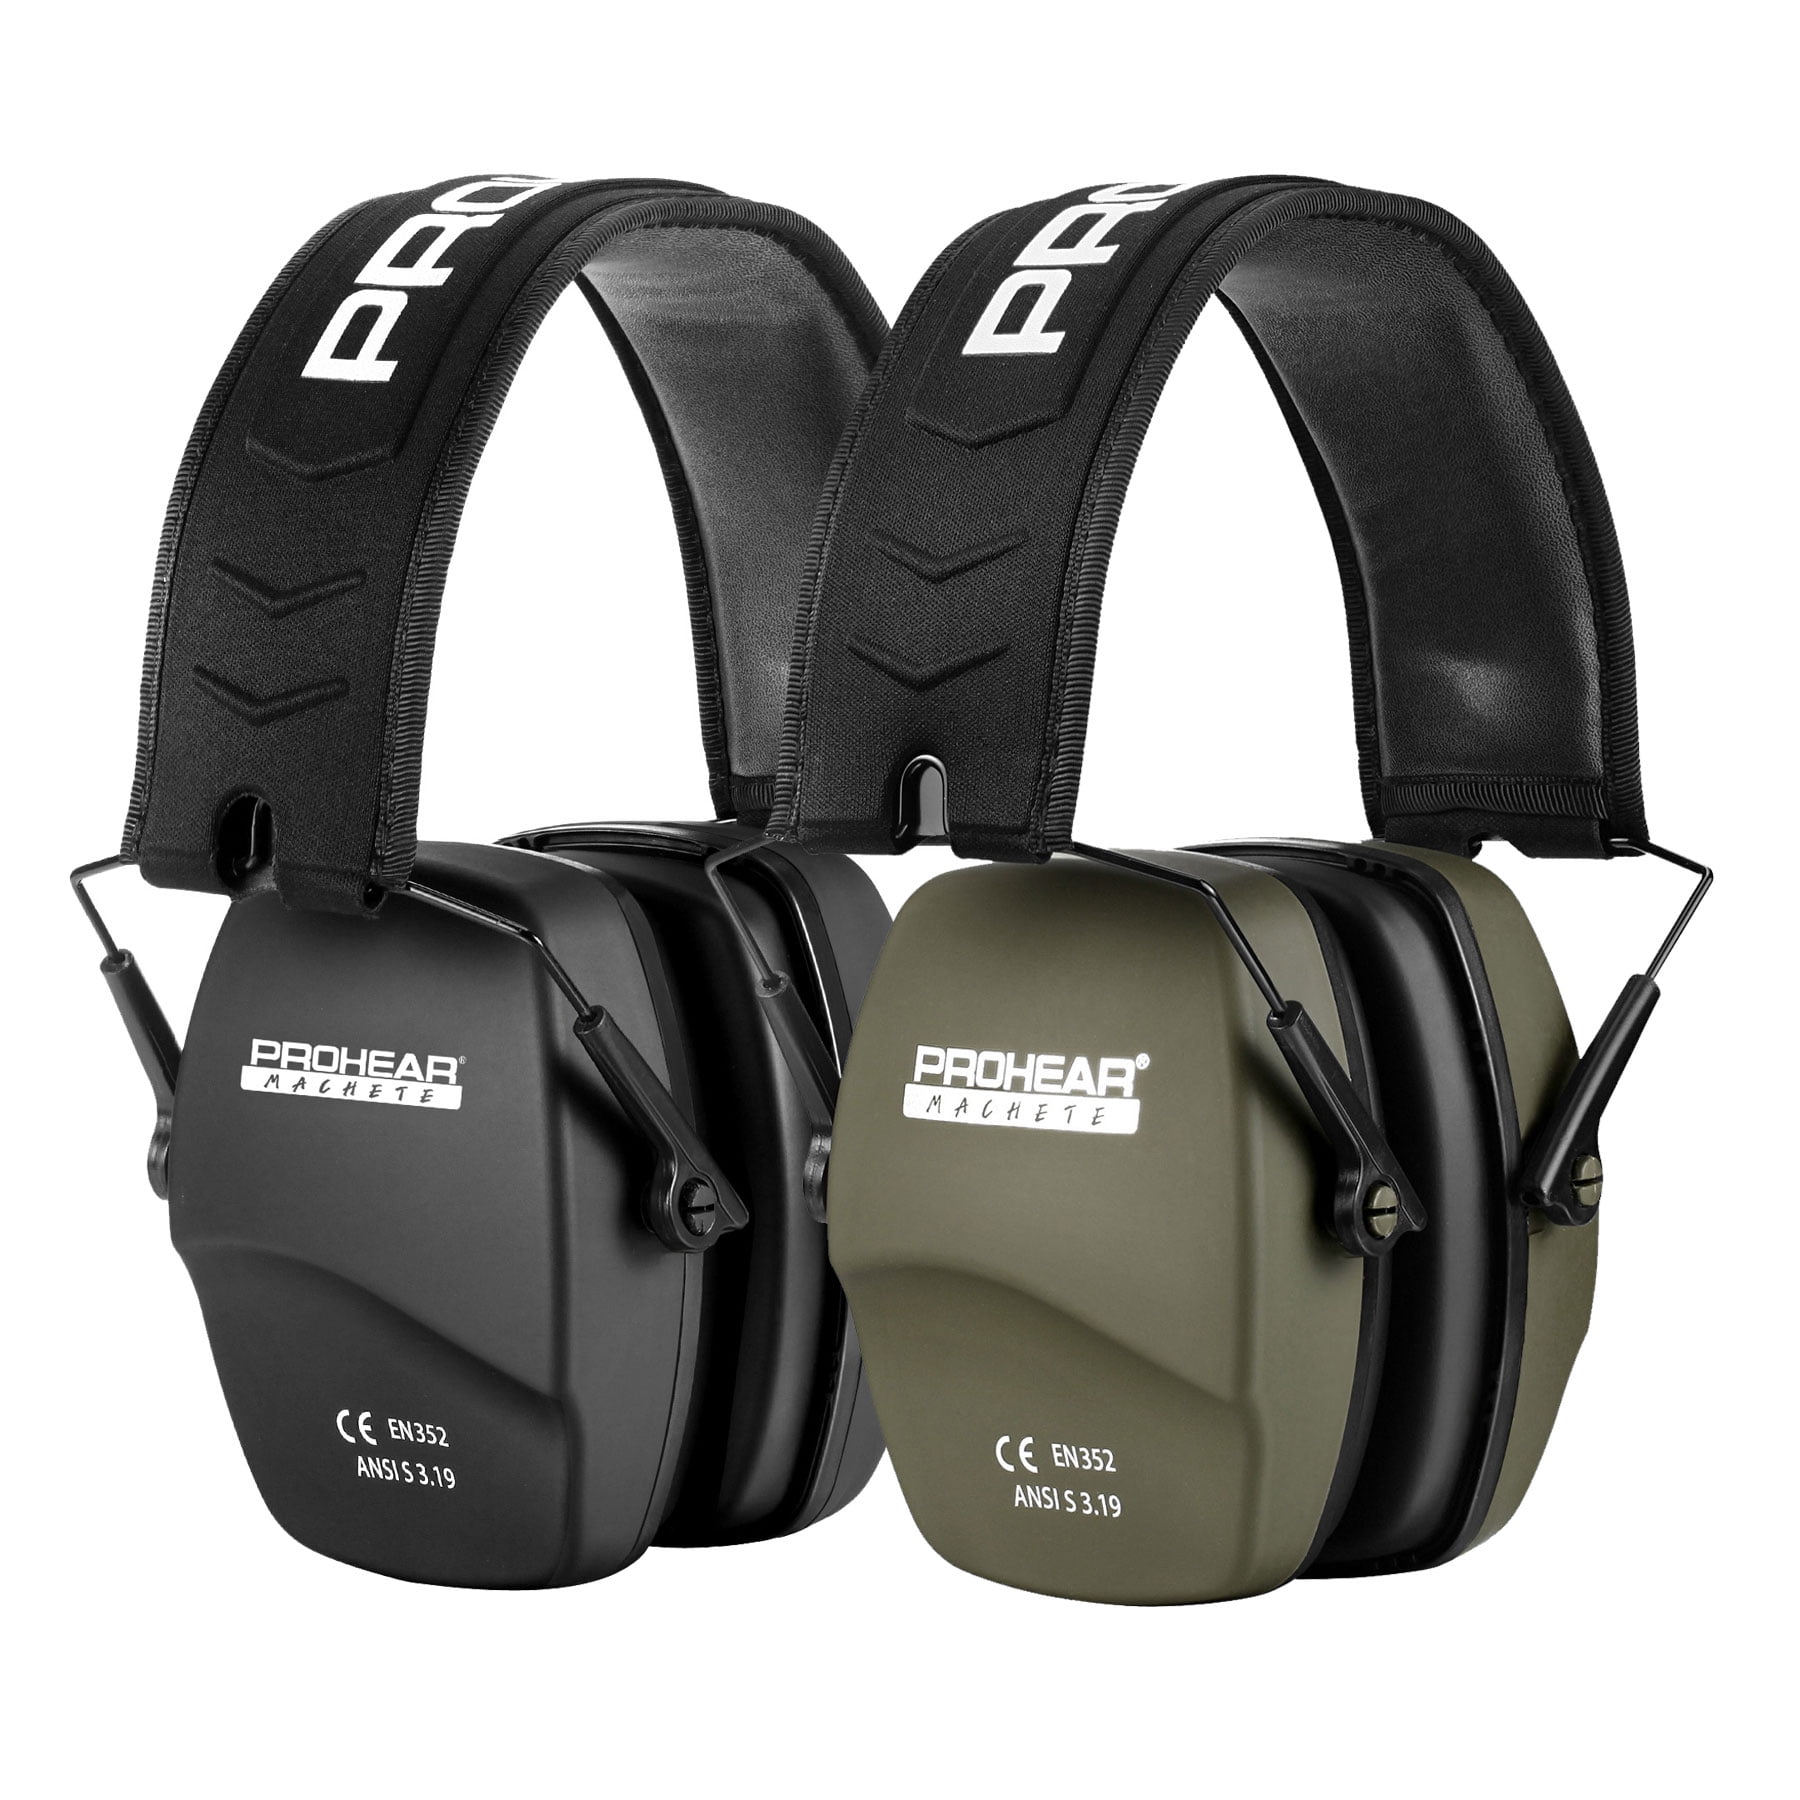 Hearing Protection for Aut... Upgraded PROHEAR 032 Ear Defenders for Children, 